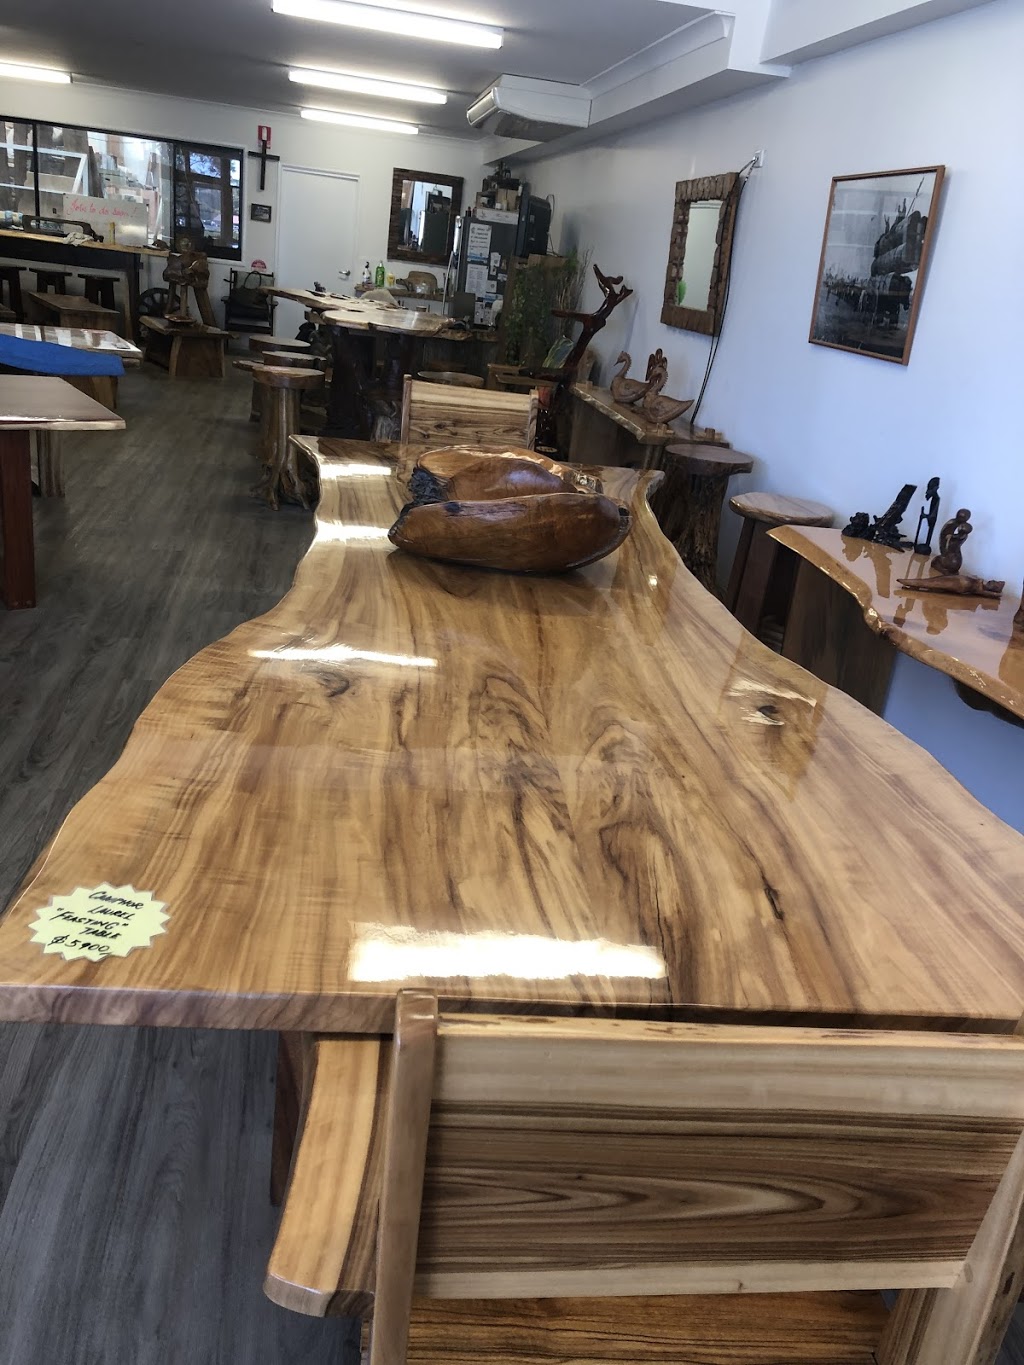 The Timber Slabman | furniture store | 153 Ferry Rd, Southport QLD 4215, Australia | 0414740198 OR +61 414 740 198